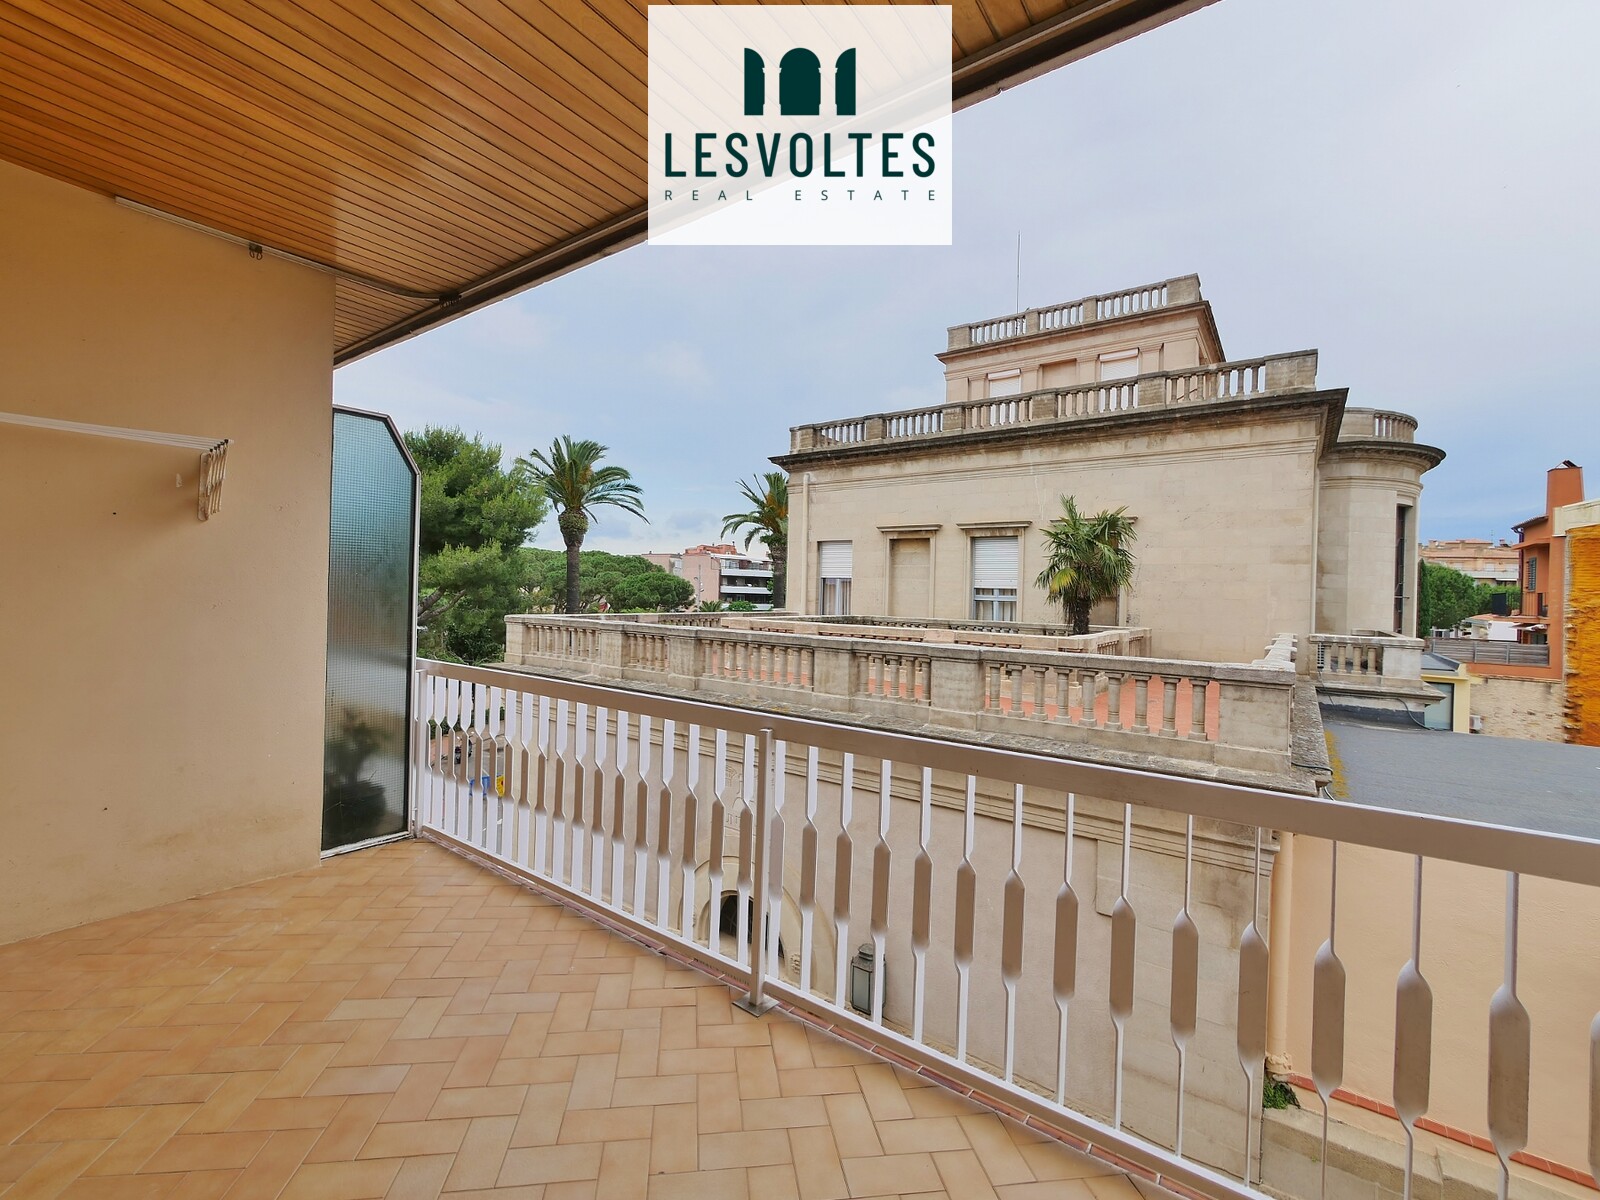 OPPORTUNITY! SPACIOUS APARTMENT WITH TERRACE FOR SALE IN THE CENTER OF PALAFRUGELL IN A GOOD COMMUNITY.